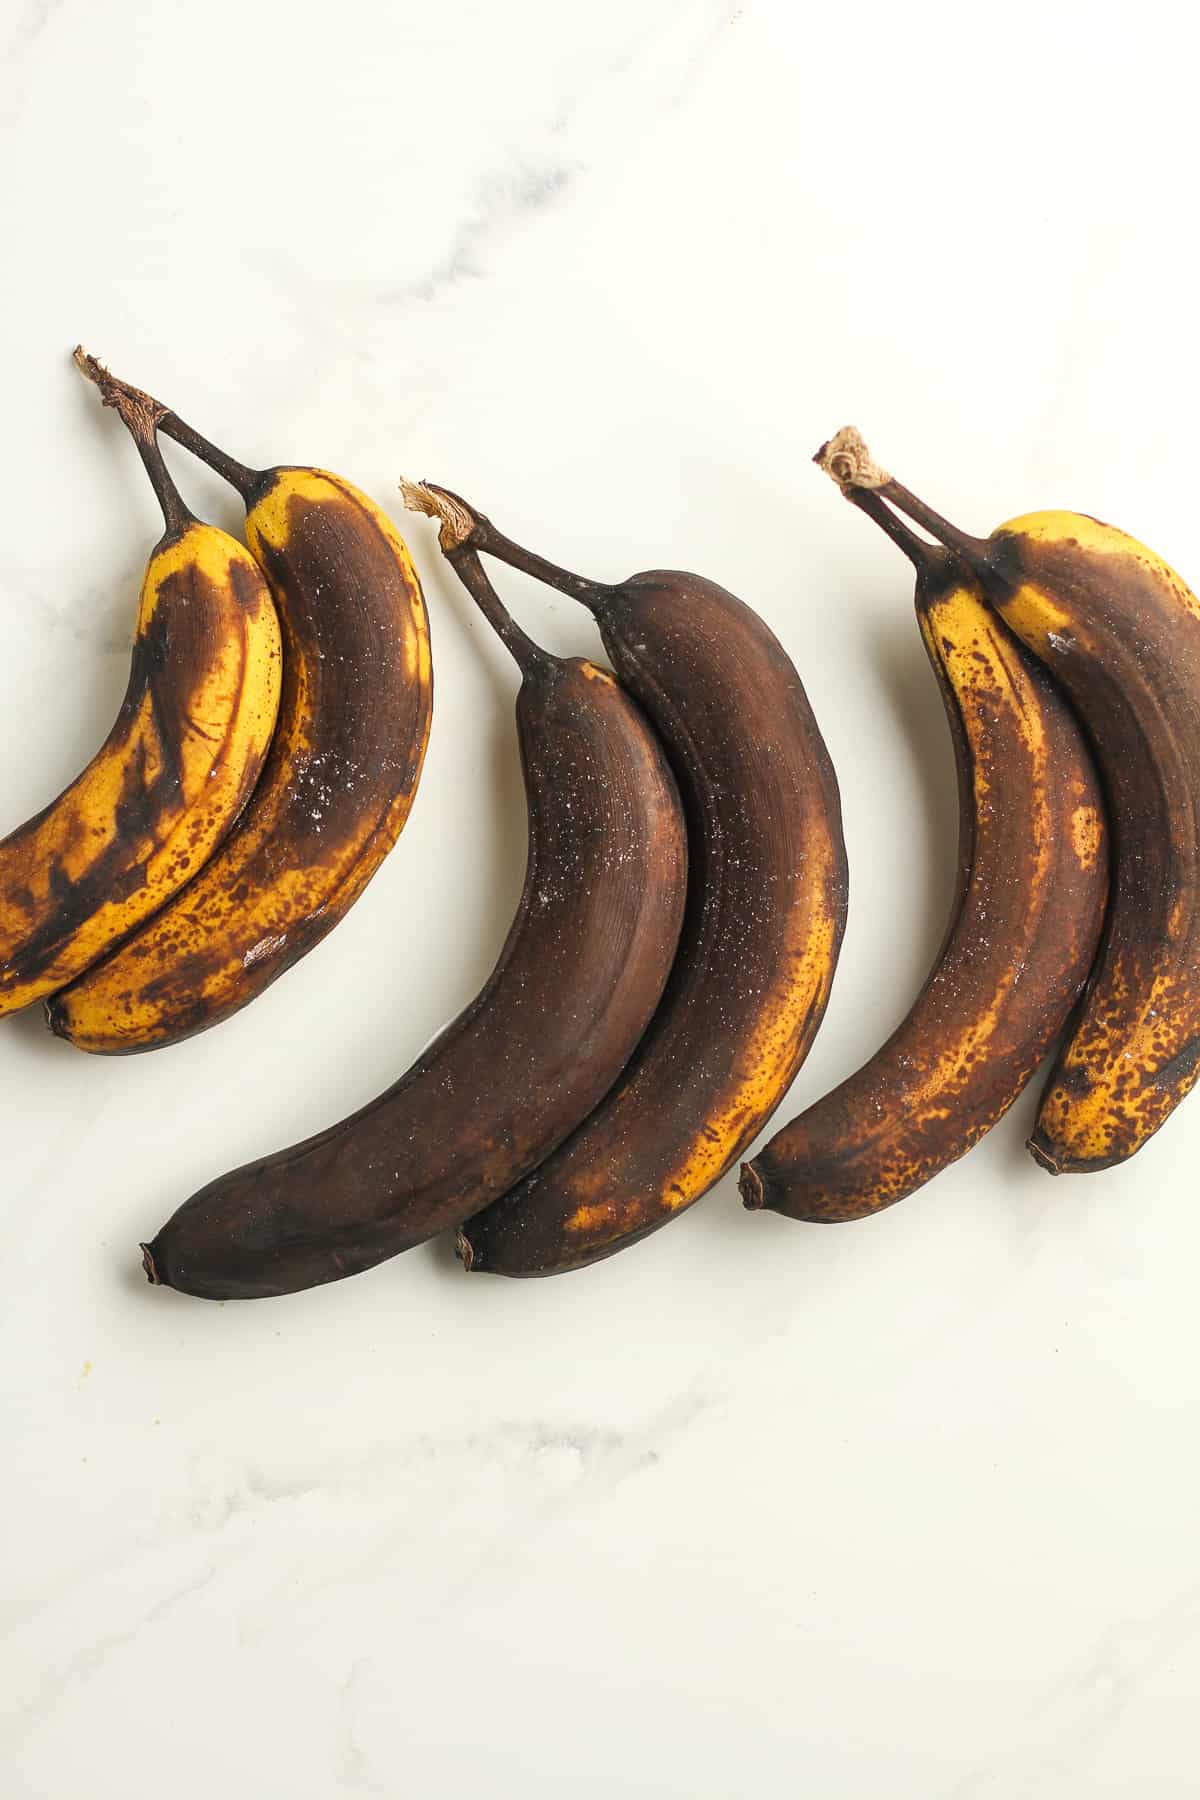 Six over-ripe bananas on a white background.